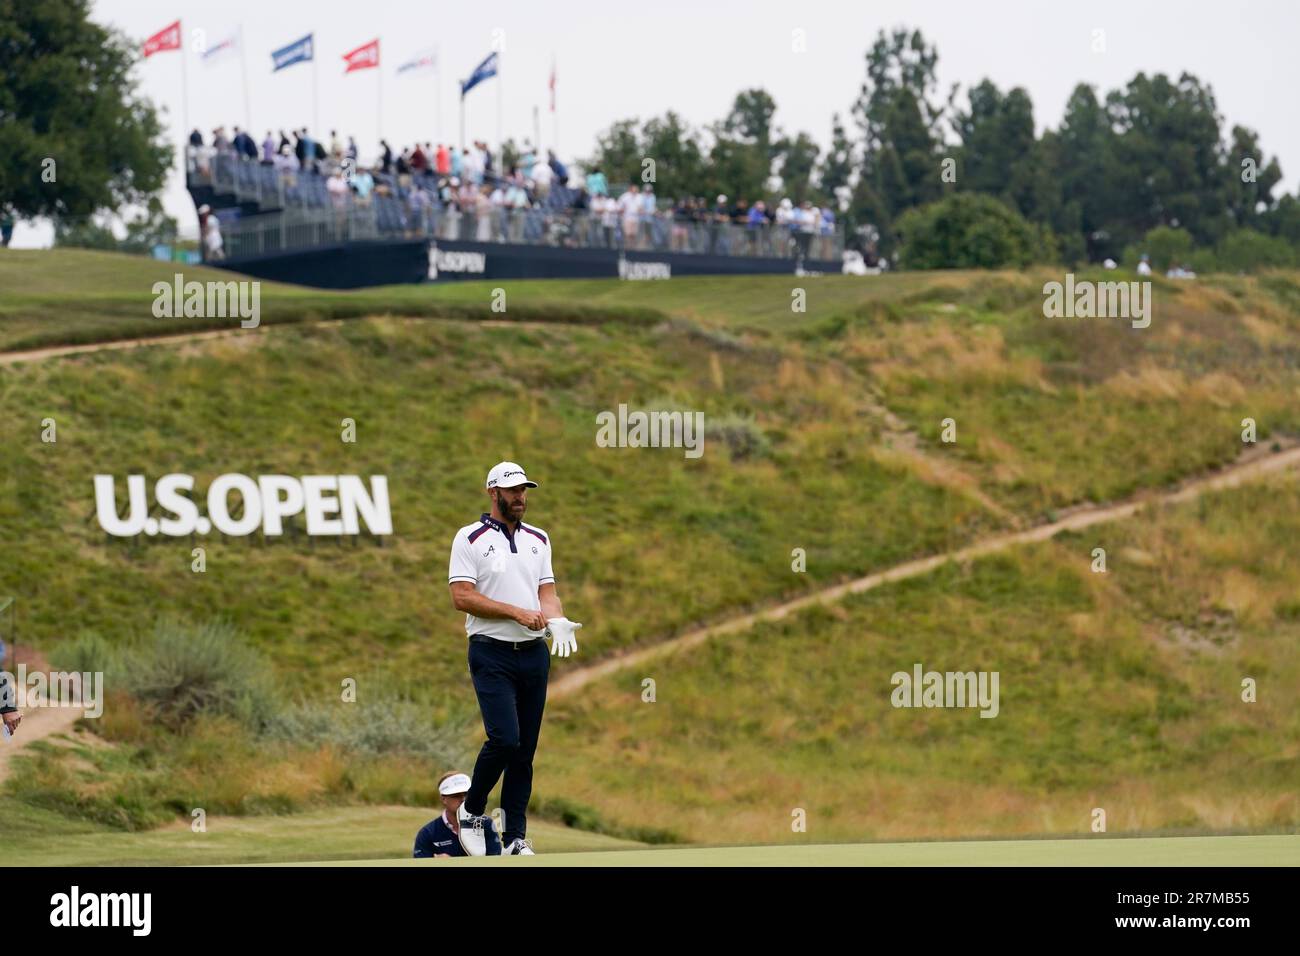 Dustin Johnson lines up a putt on the fourth hole during the second round of the U.S